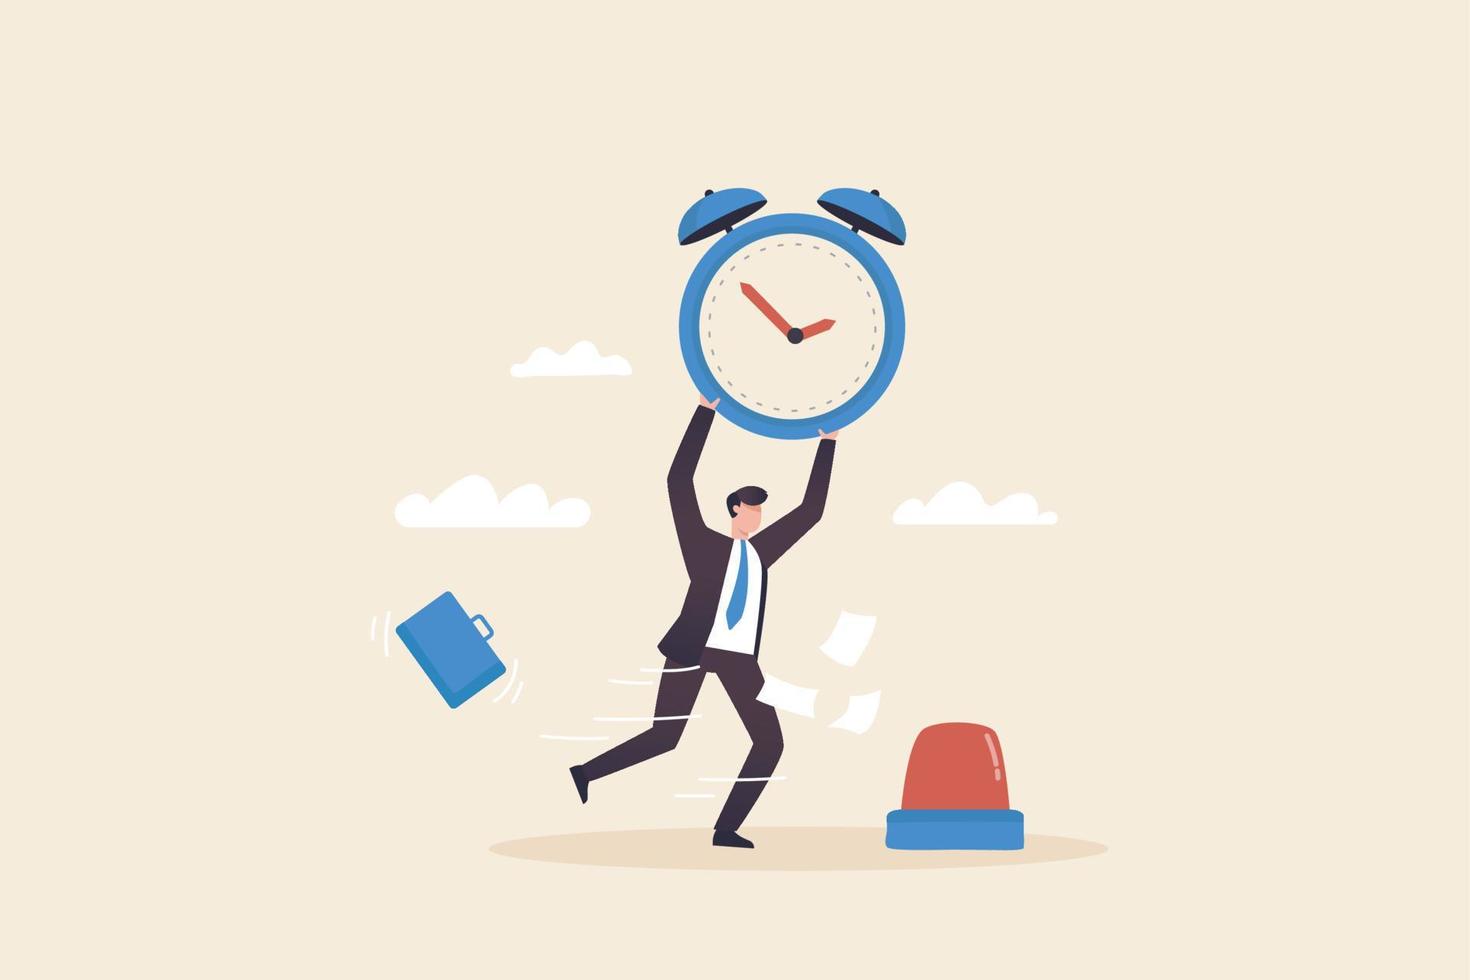 Poster In Hand Business Concept With Time For A Break Stock Illustration -  Download Image Now - iStock